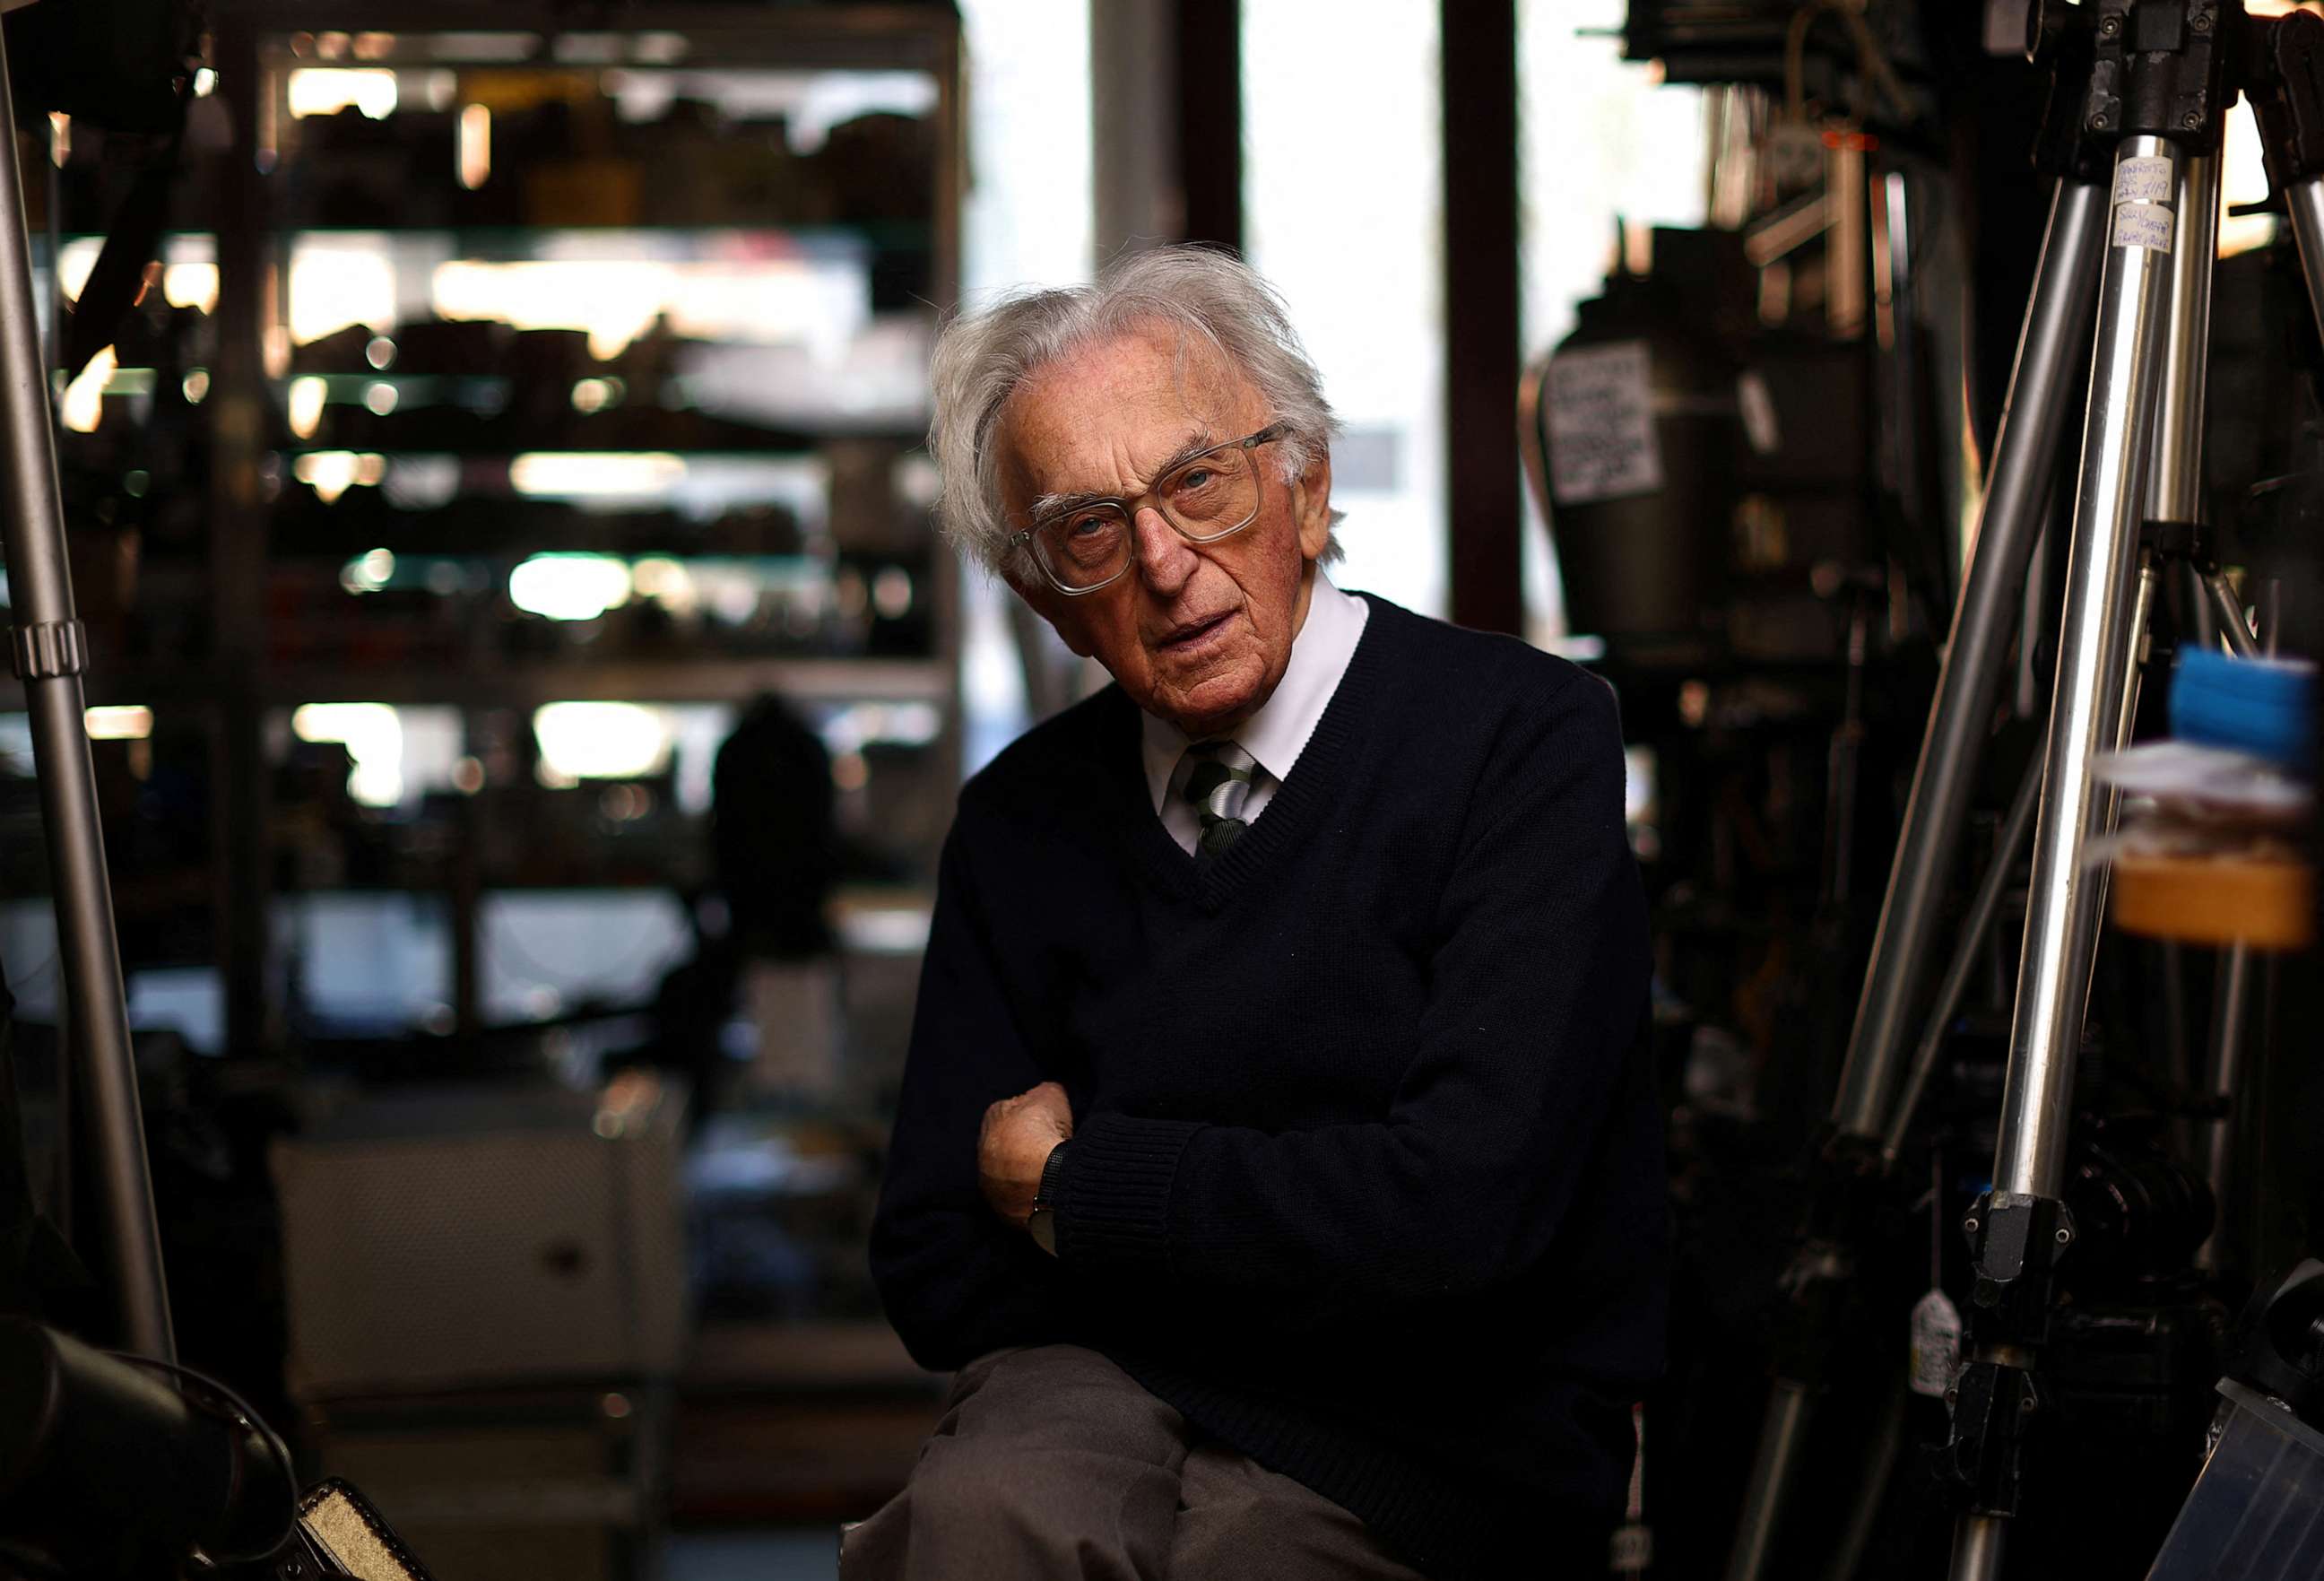 PHOTO: Alex Falk, 86, poses for a photograph in the Mr. Cad camera shop he owns in London, April 19, 2023.